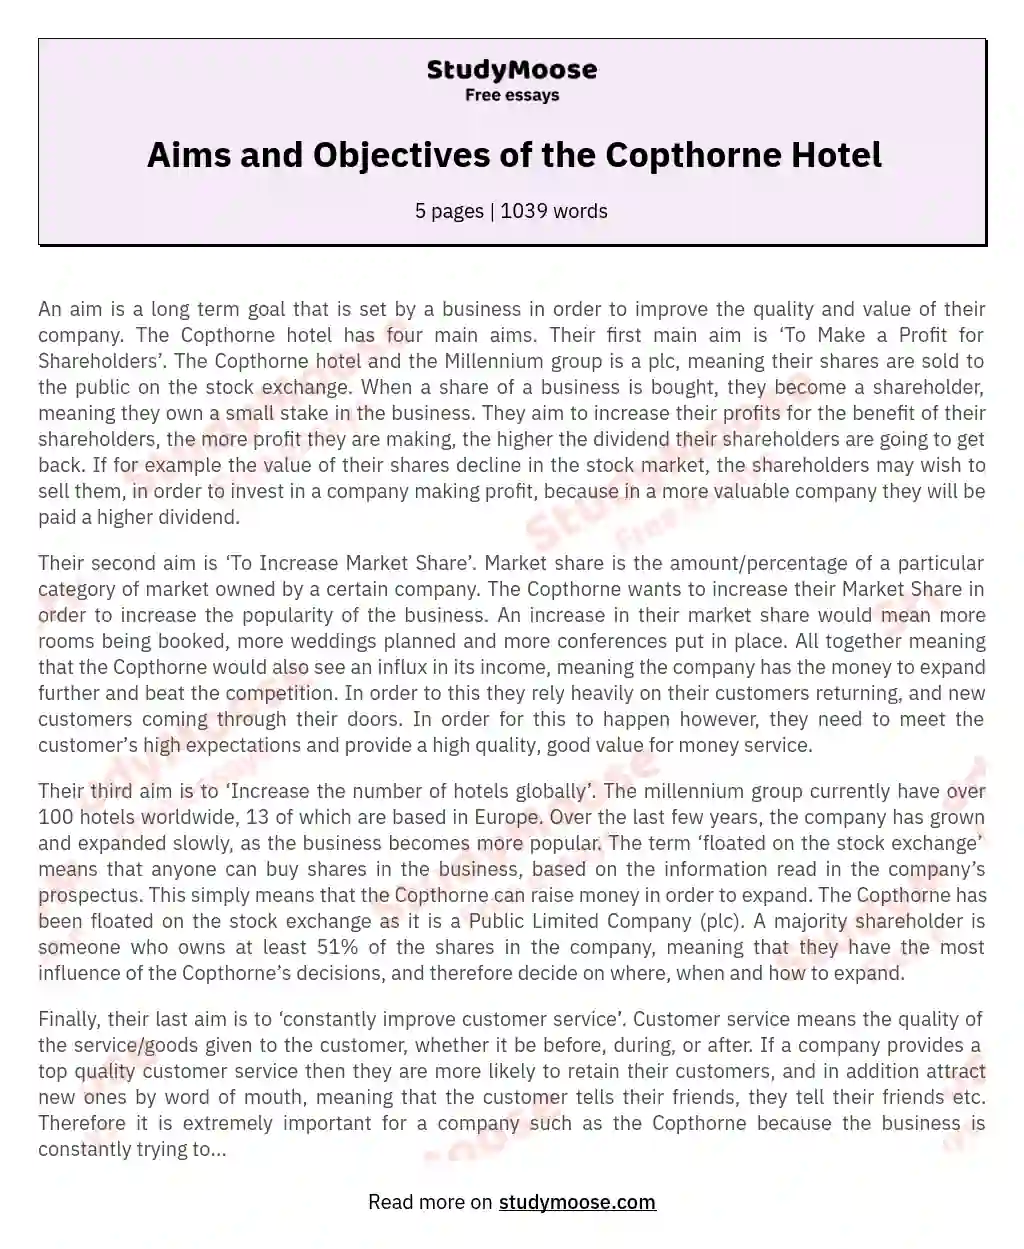 Aims and Objectives of the Copthorne Hotel essay